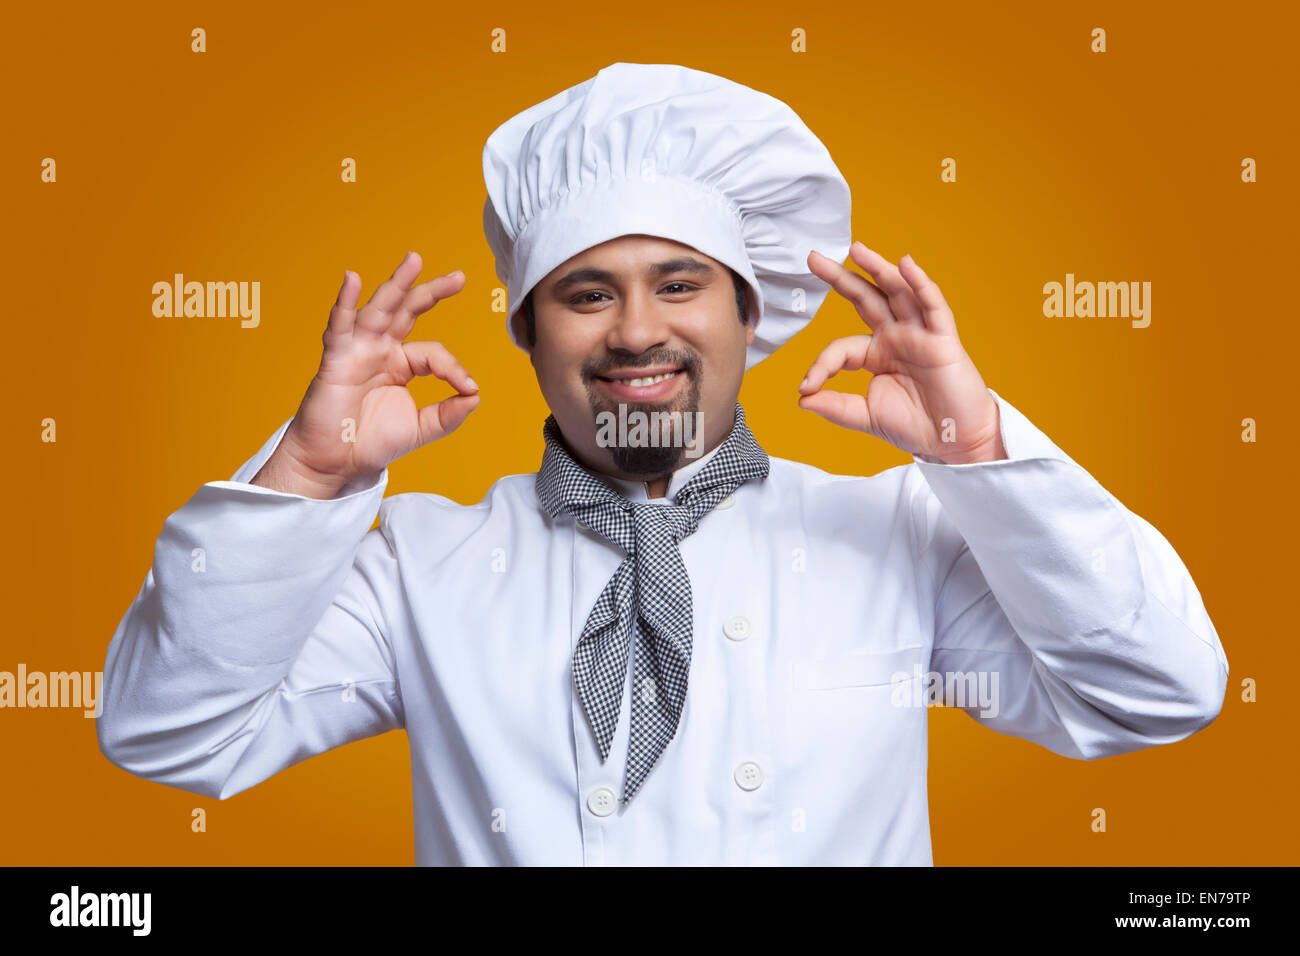 Portrait of chef giving ok hand gesture Stock Photo